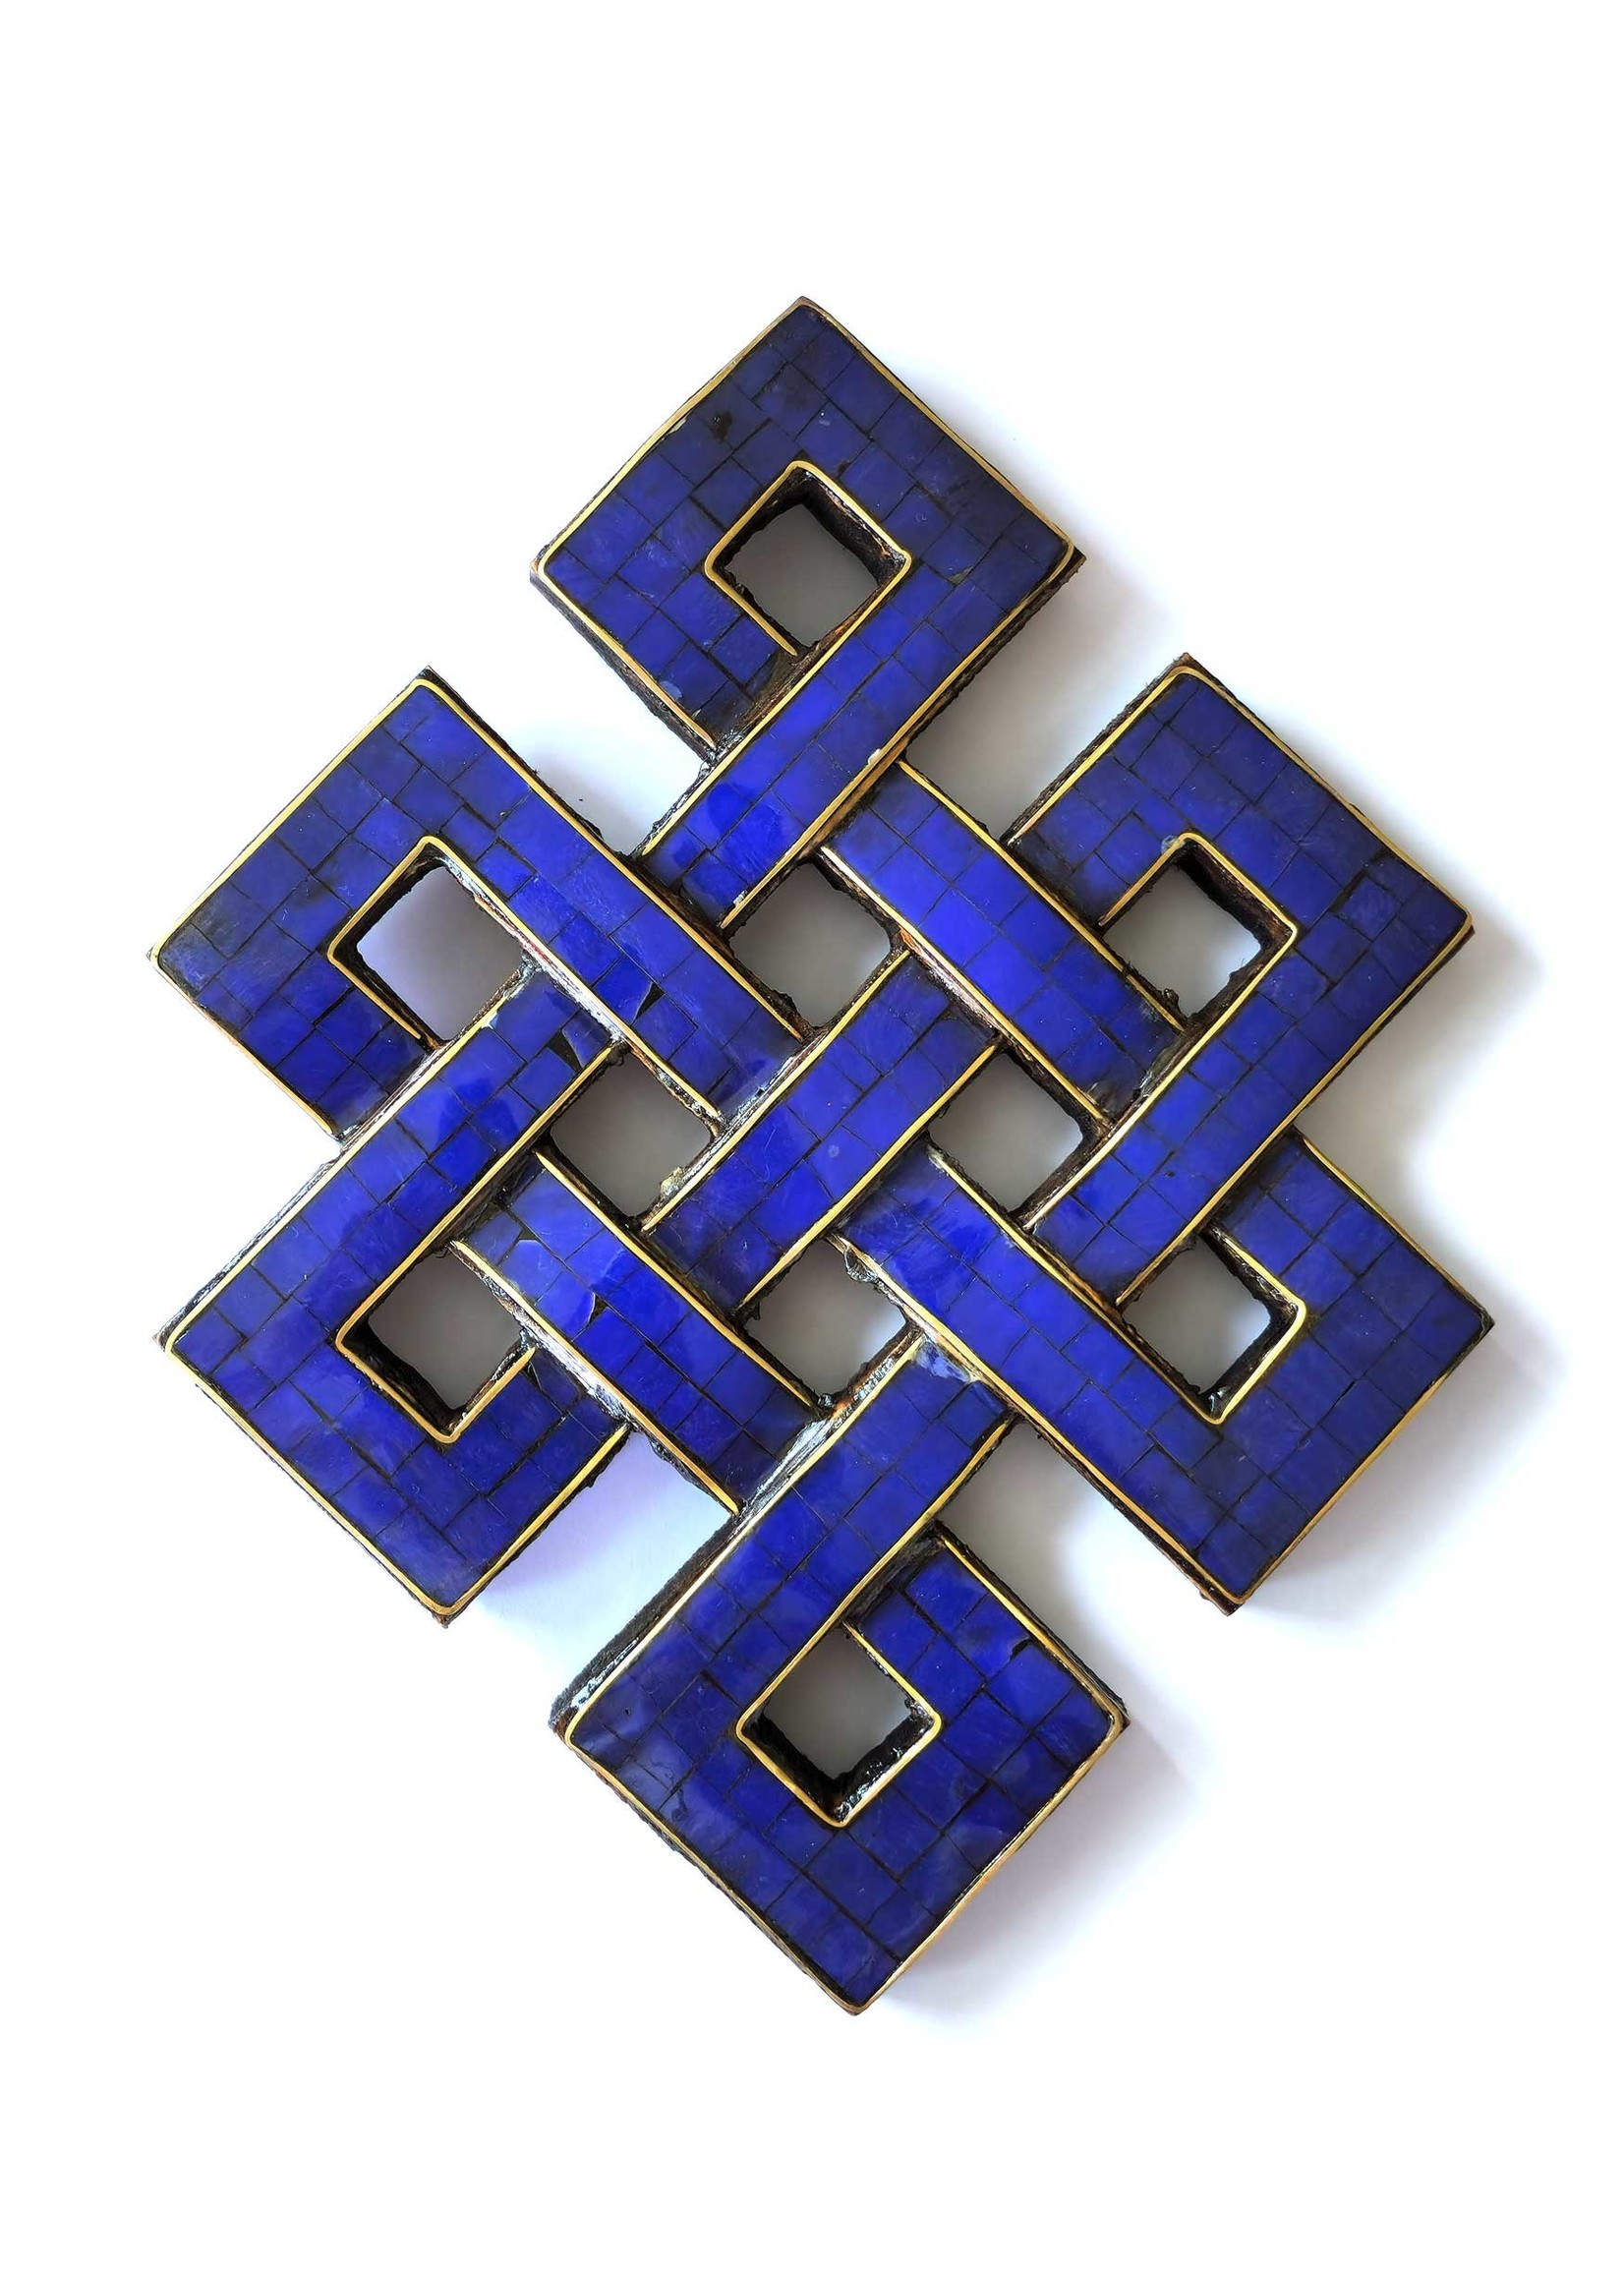 Endless knot wall hanging, hardtofind.